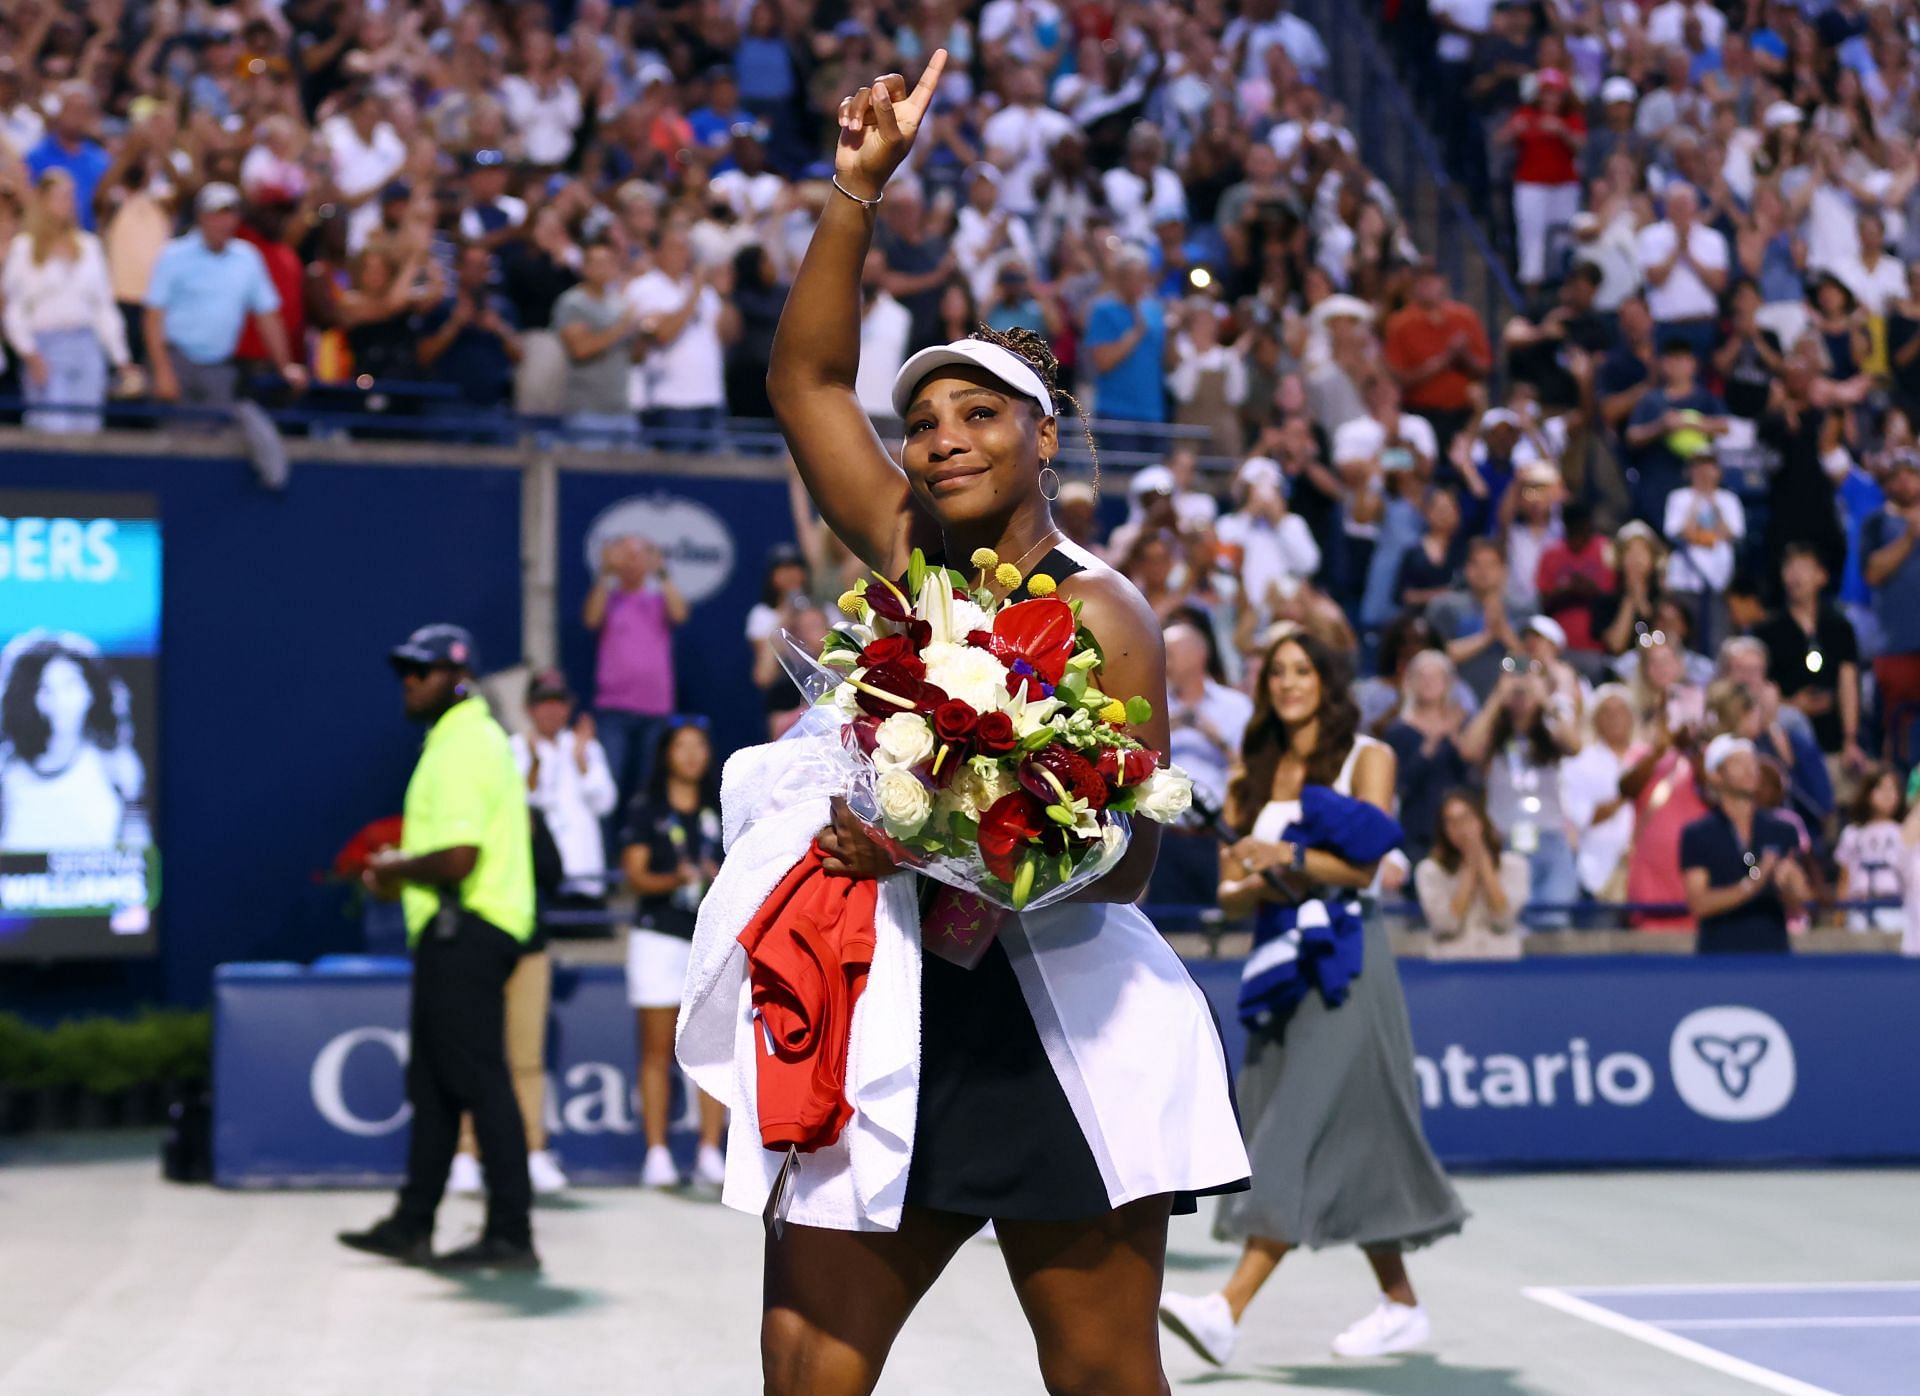 Serena Williams after her Canadian Open exit.